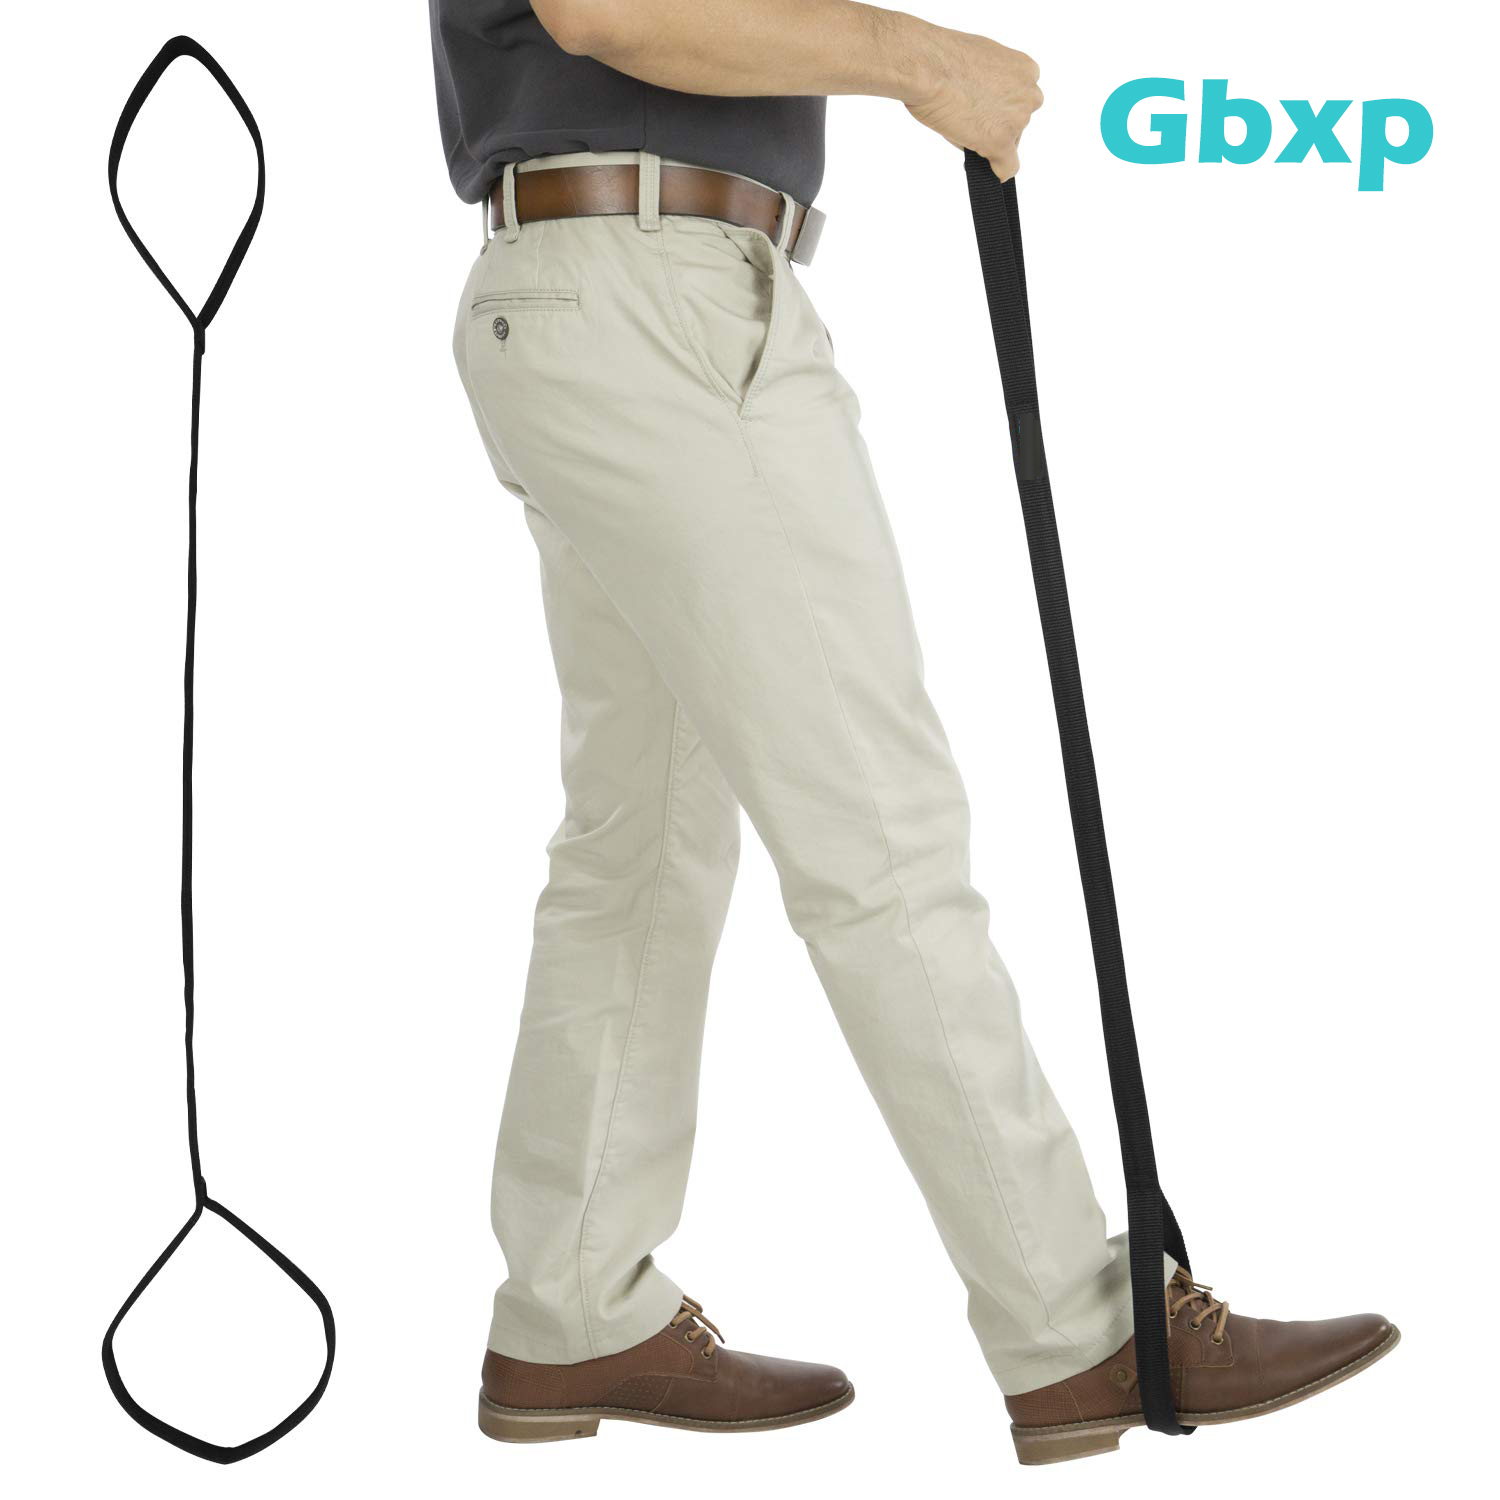 Gbxp Leg Lifter Strap (44 Inch) – Rigid Foot Loop, Hand Grip for Adult, Senior, Elderly, Handicap, Disability, Pediatrics – Long Band Mobility Aid for Car, Bed, Couch, Hip Replacement, Wheelchair